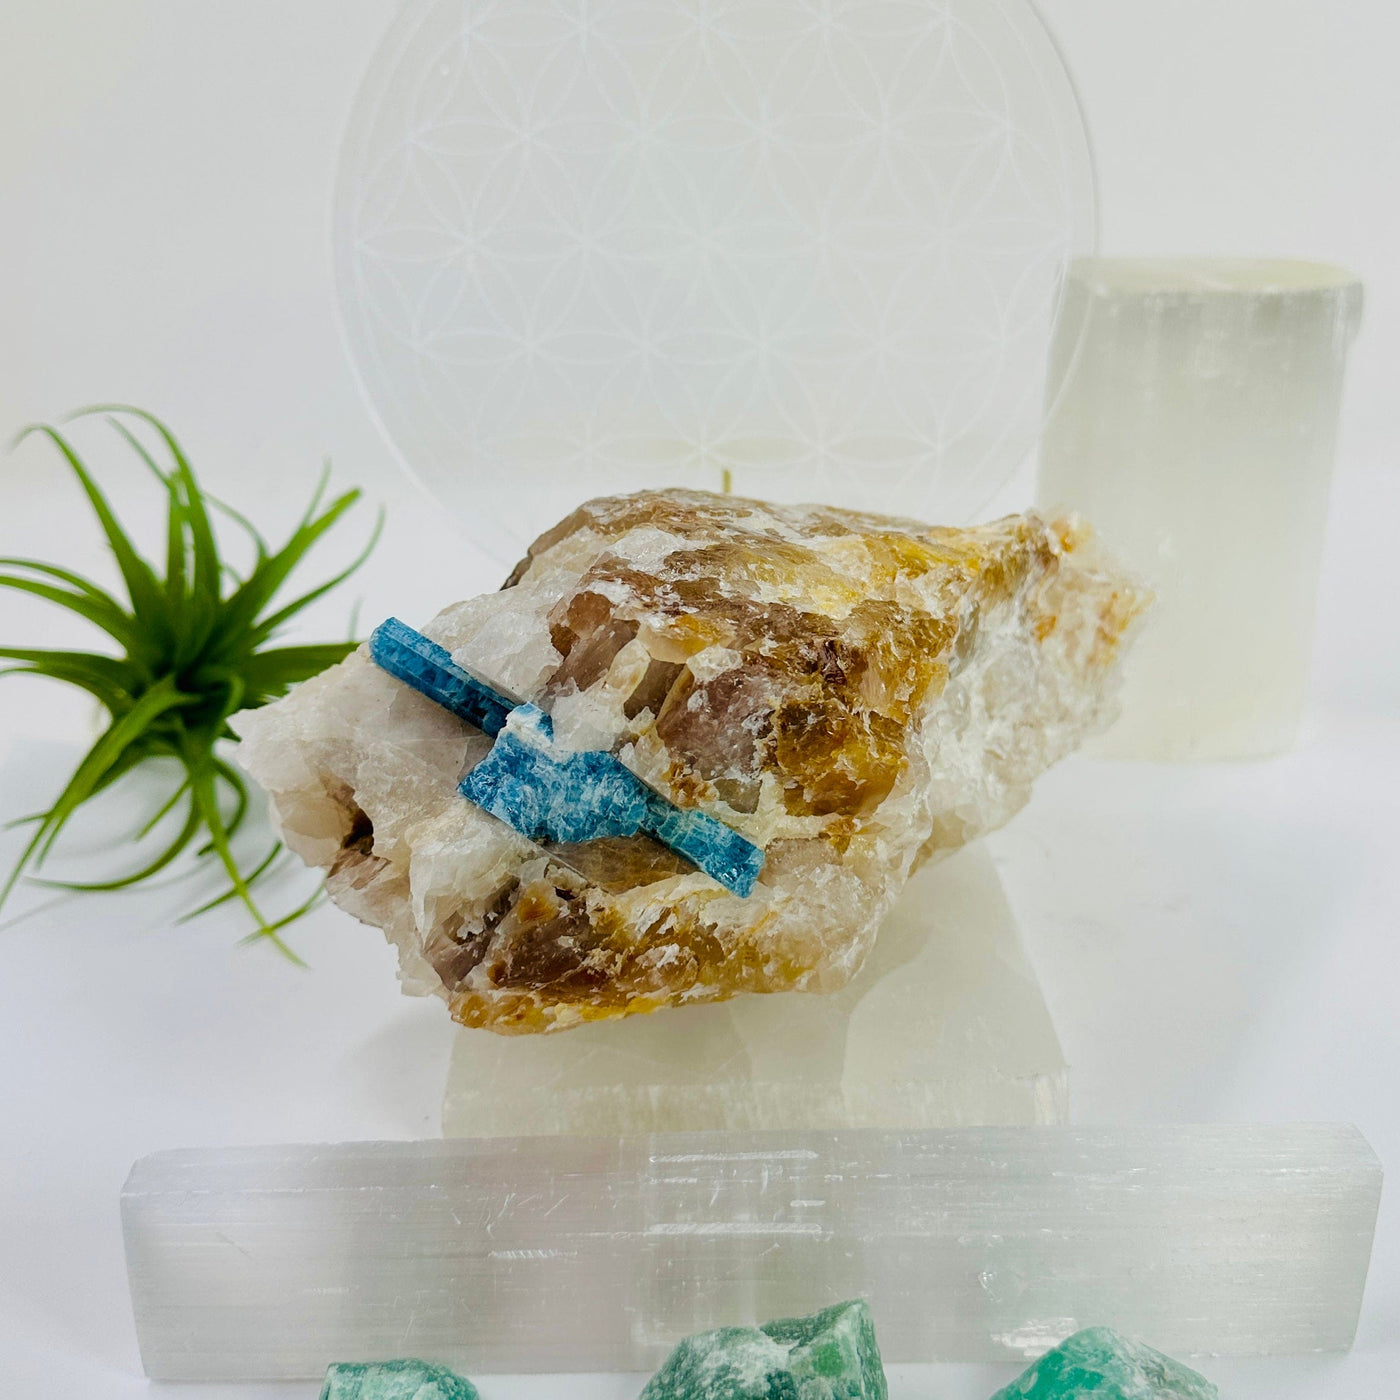 Aquamarine in matrix - aquamarine crystal embedded in large natural rough stone front view